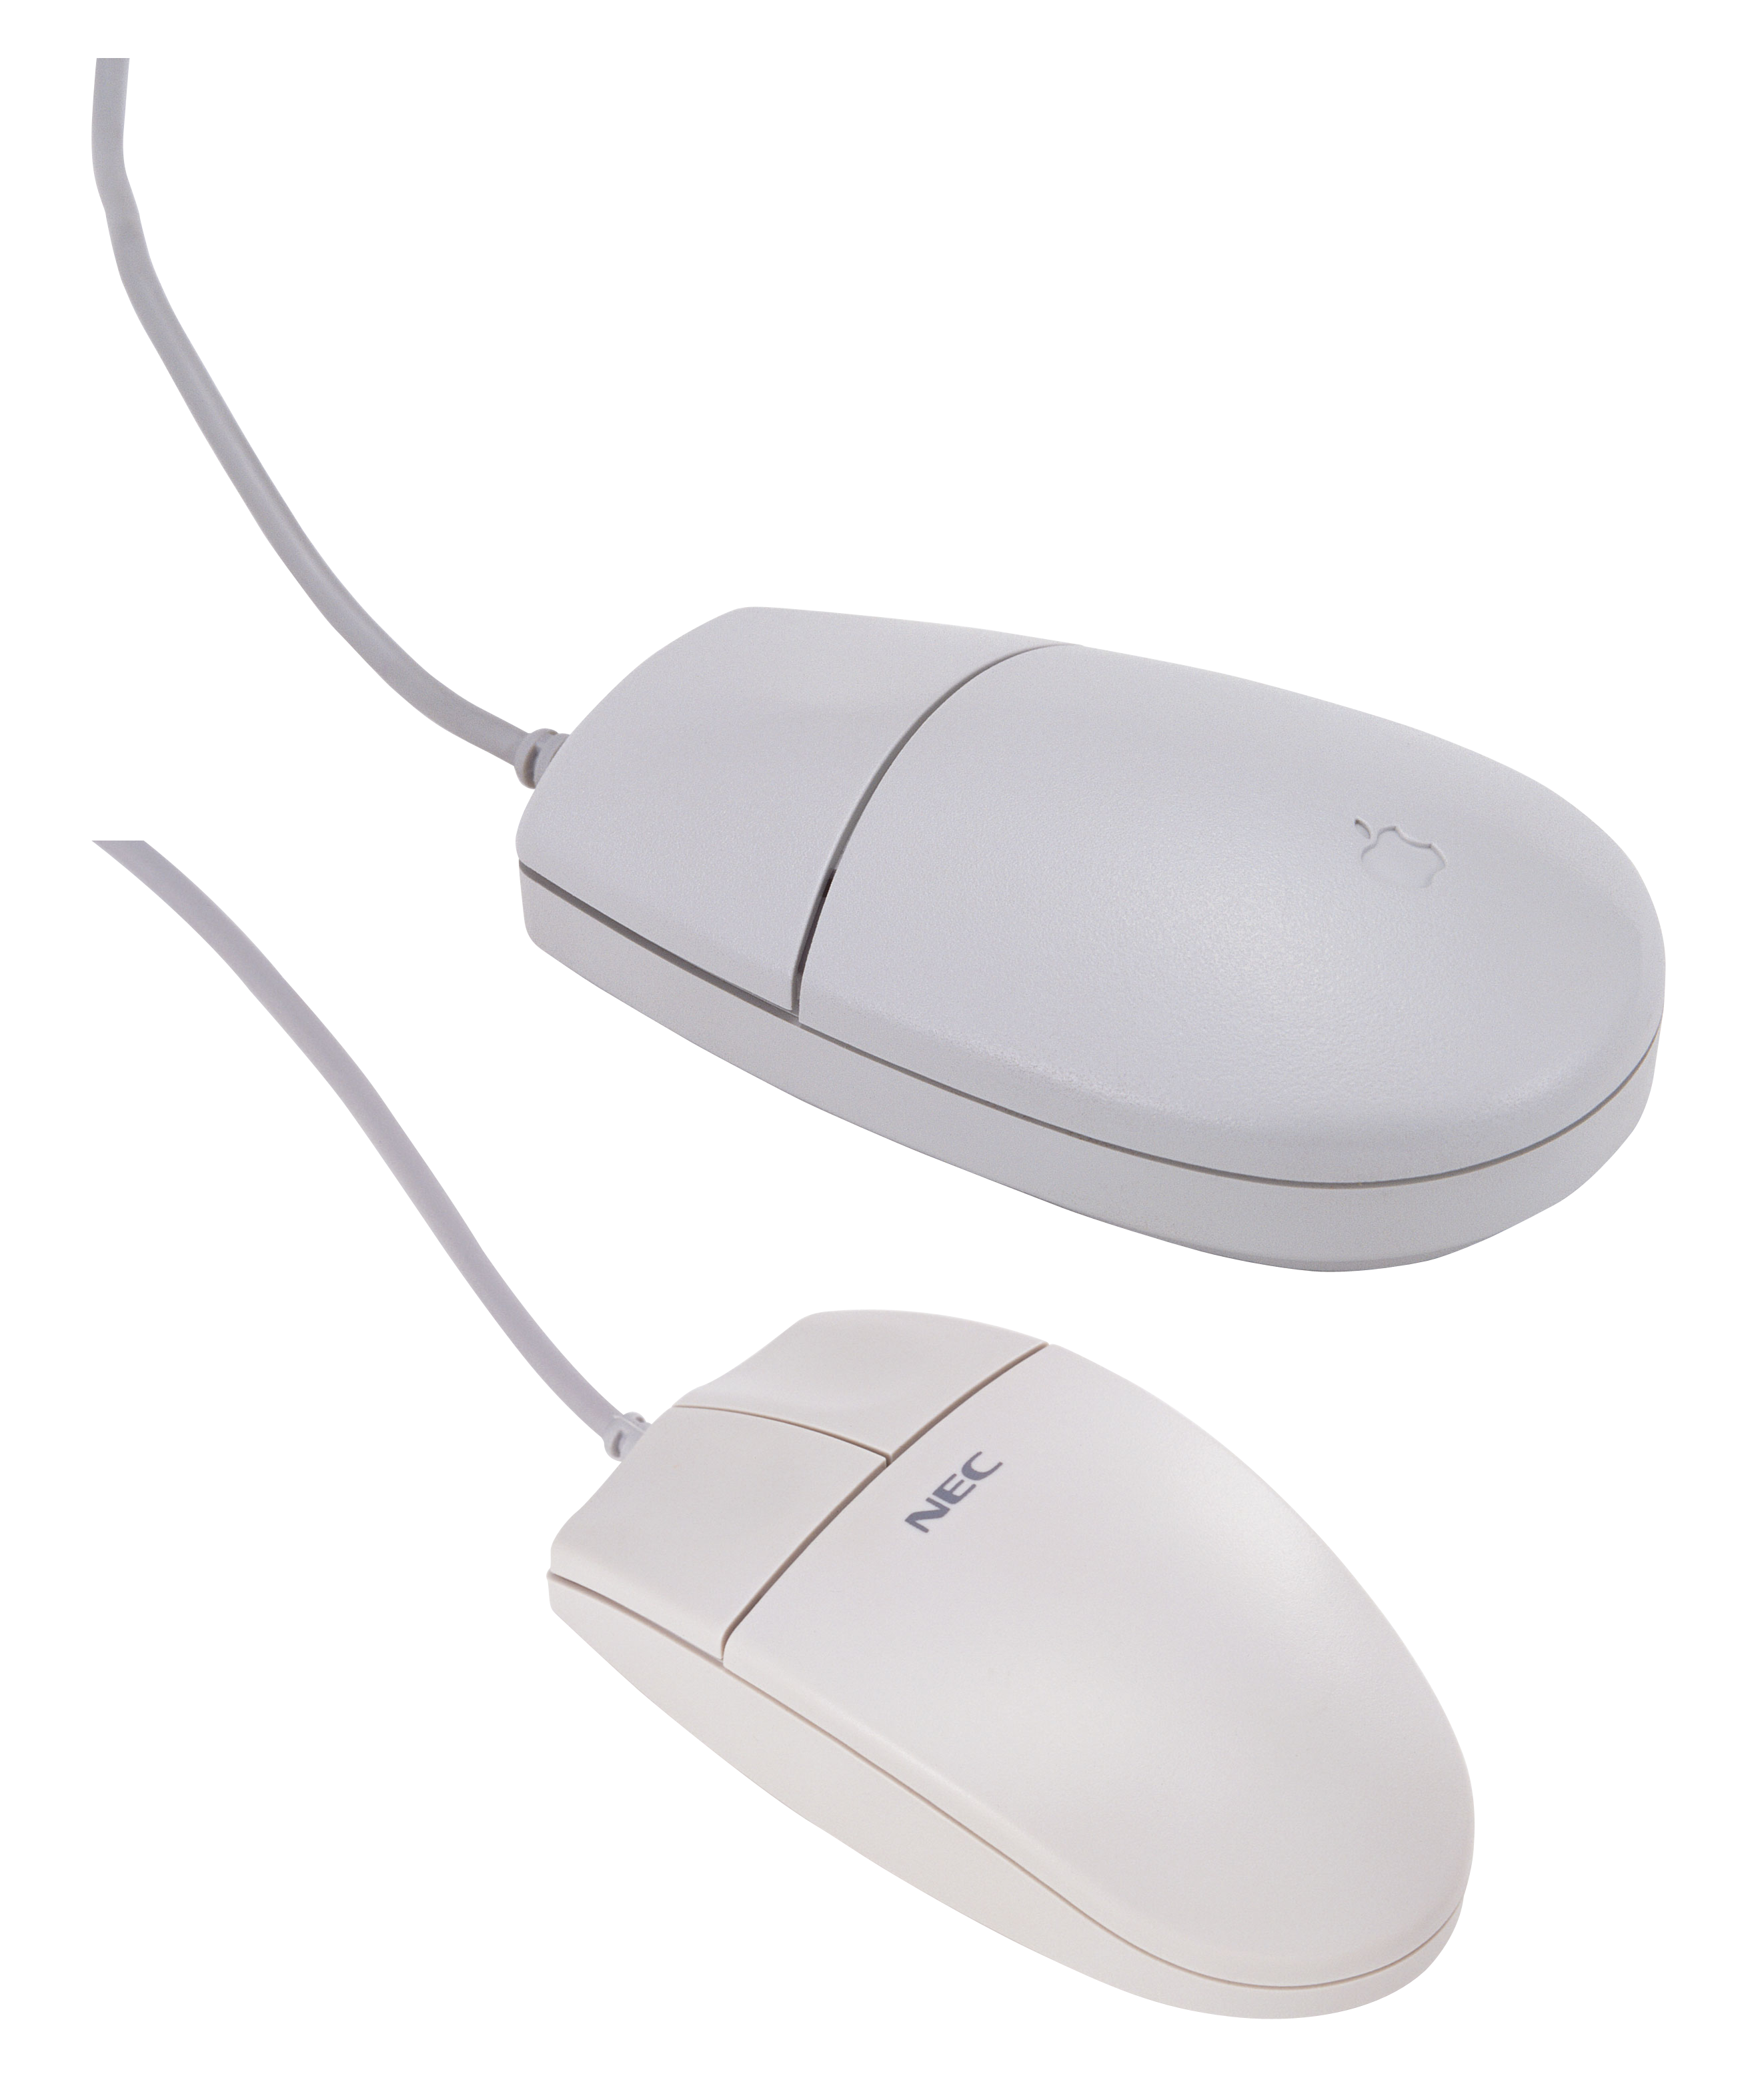 Computer mouse PNG image